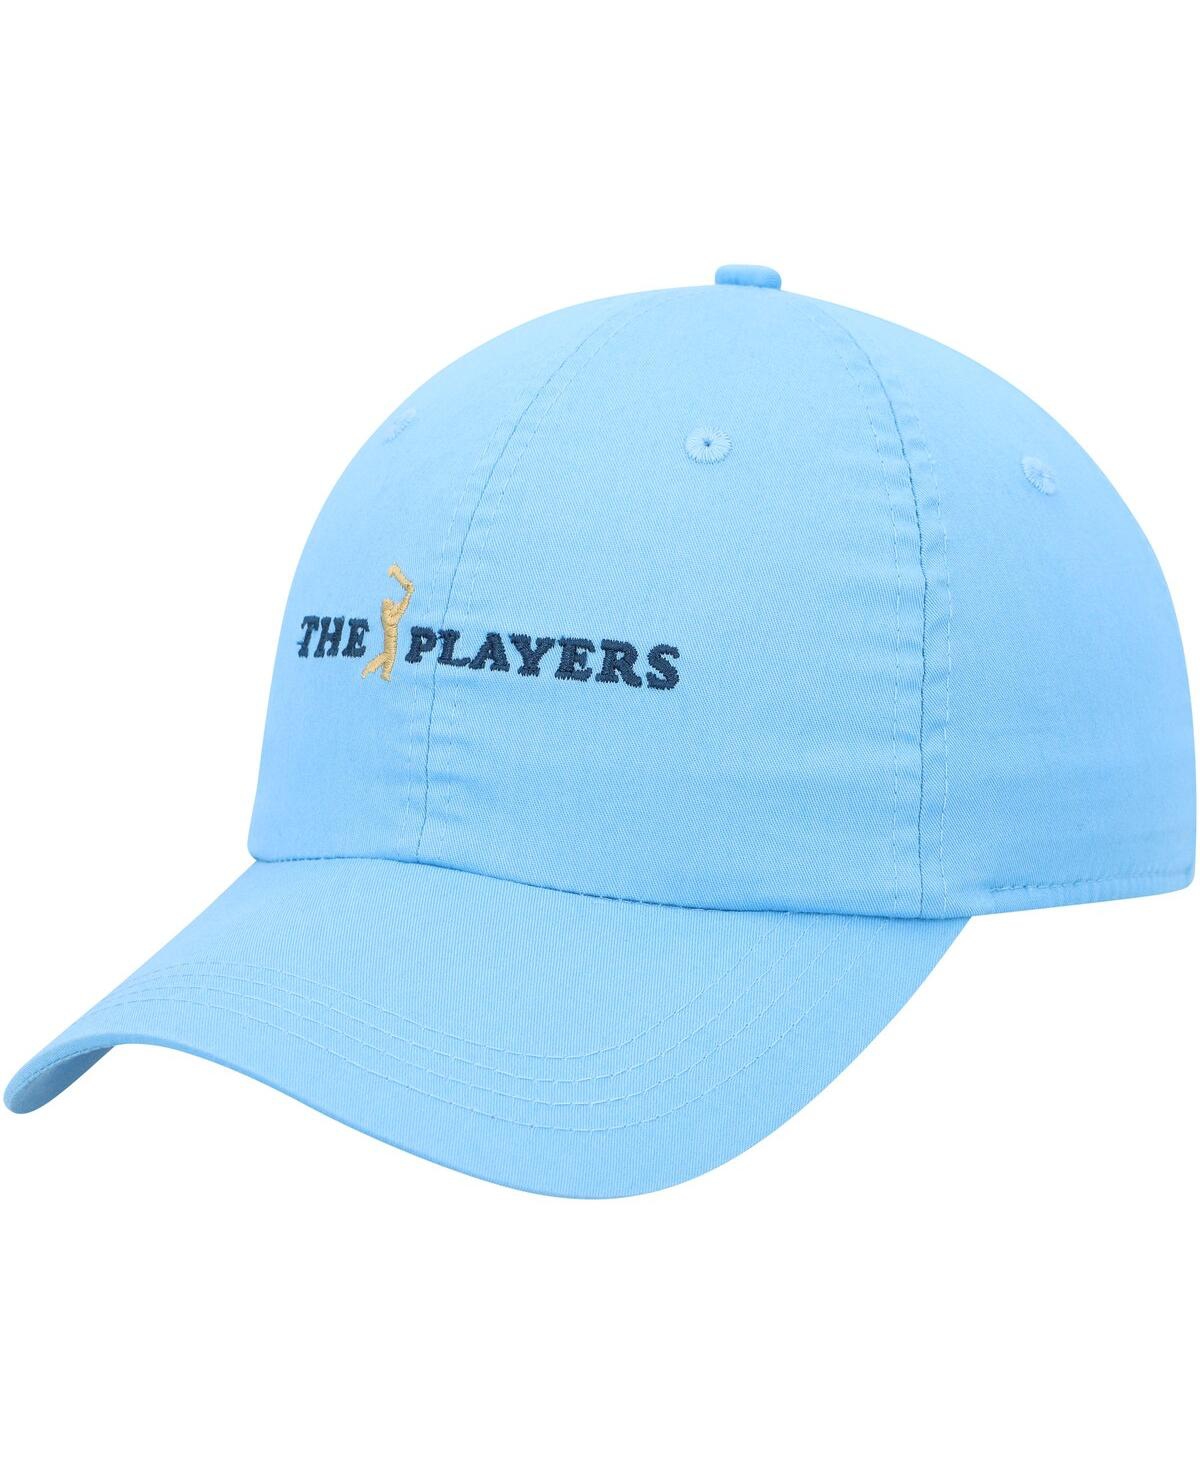 AHEAD WOMEN'S AHEAD LIGHT BLUE THE PLAYERS MARION ADJUSTABLE HAT